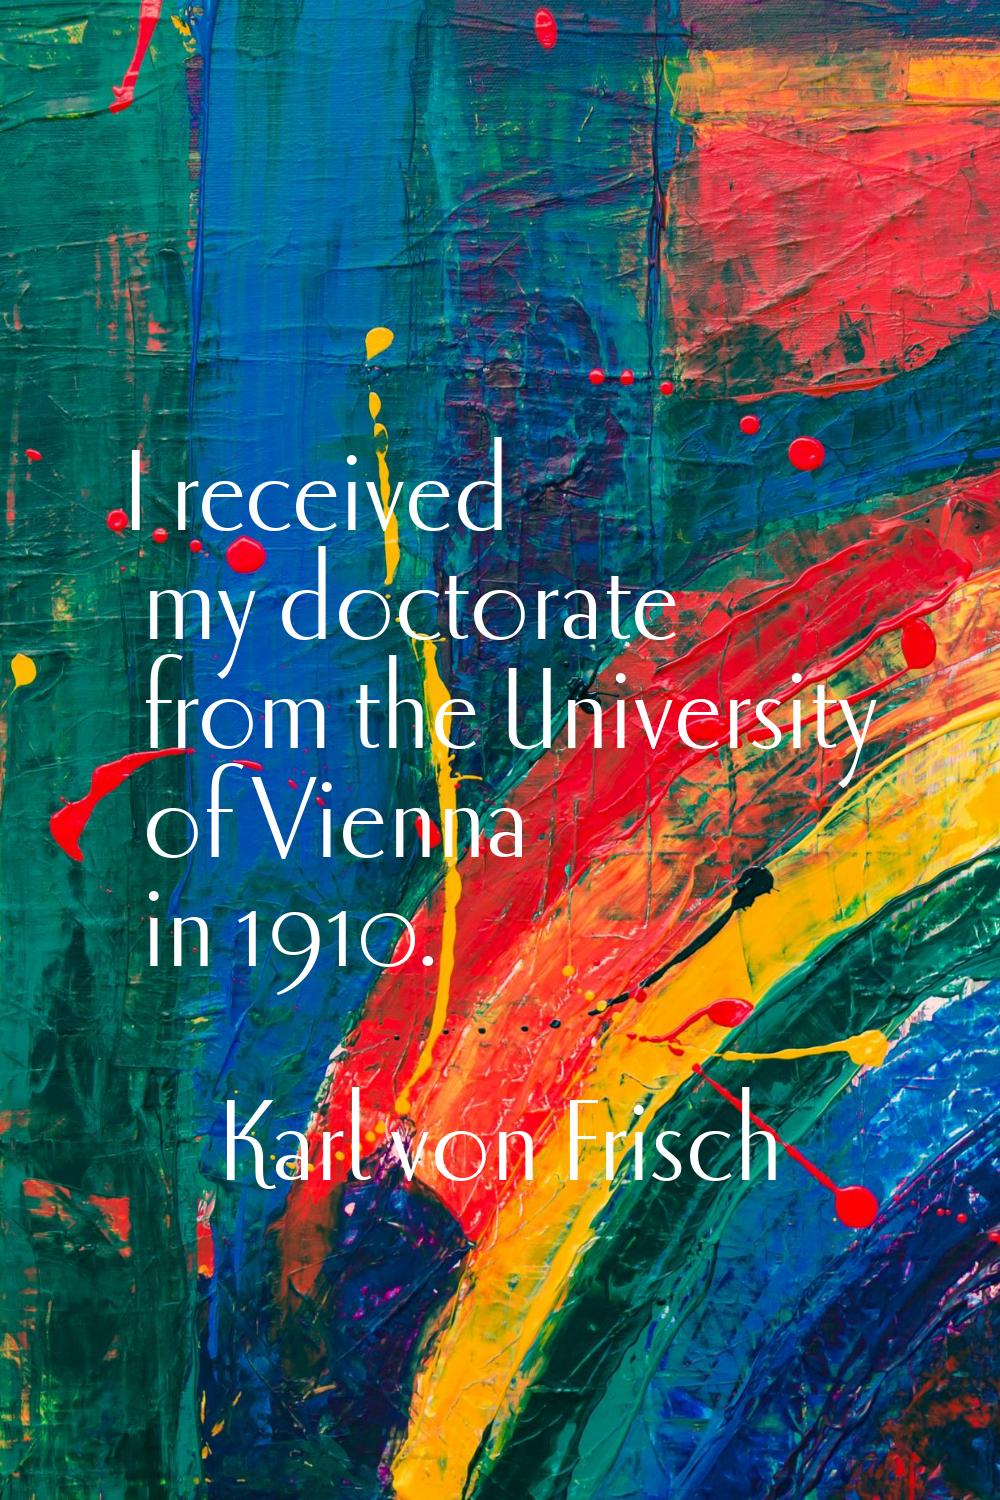 I received my doctorate from the University of Vienna in 1910.